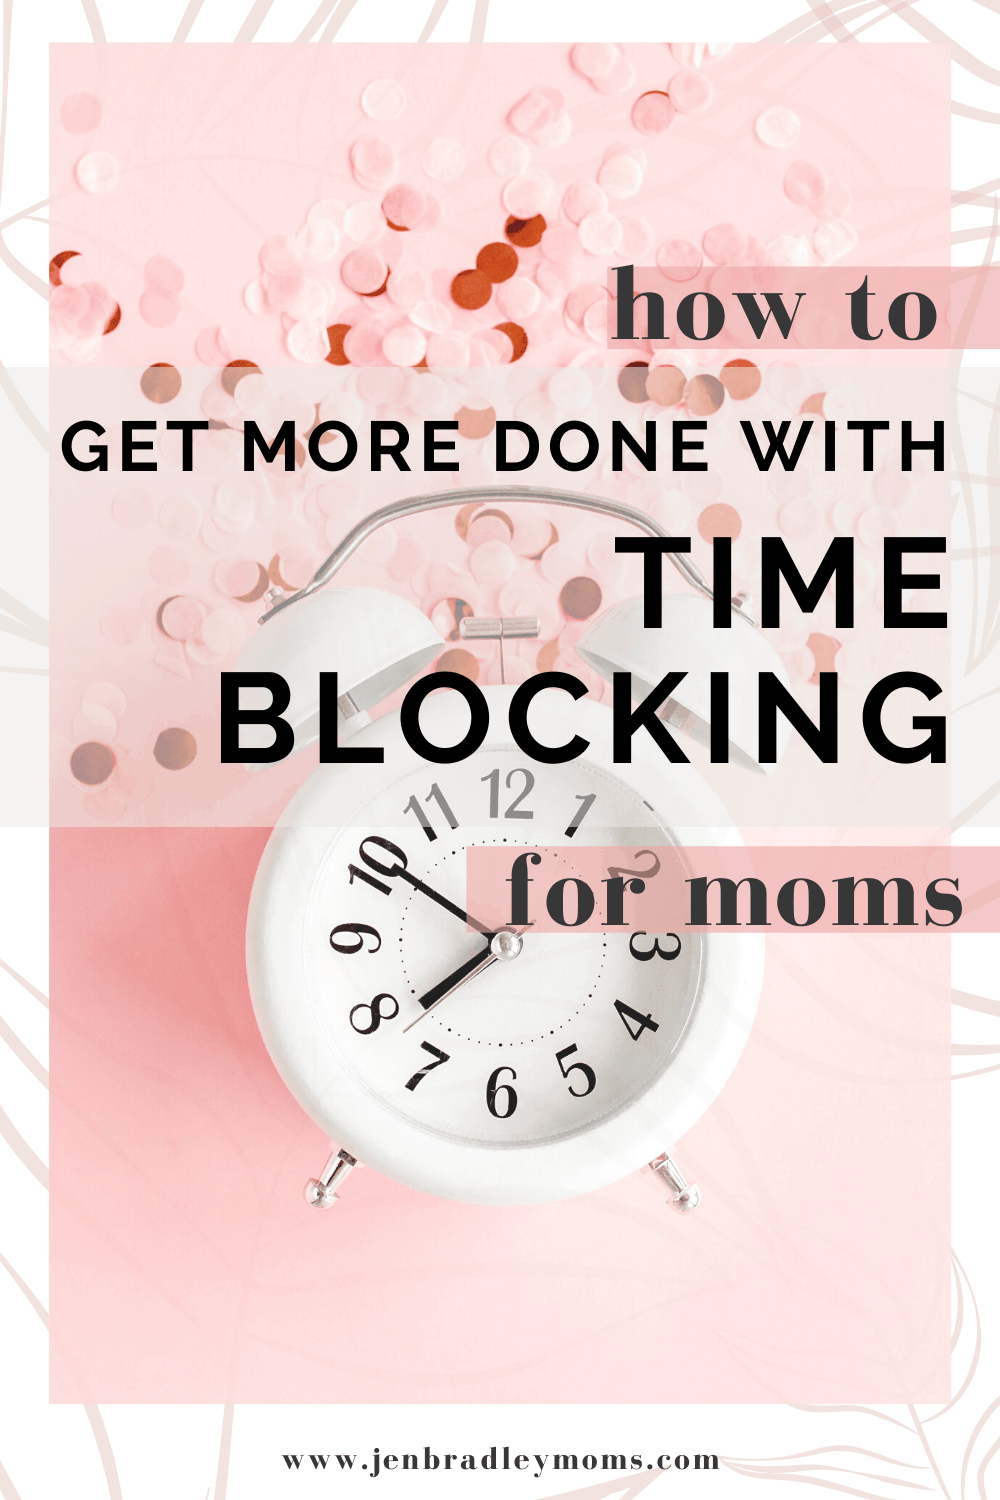 How to Start Time Blocking for Moms - Mom Life Hacks 101